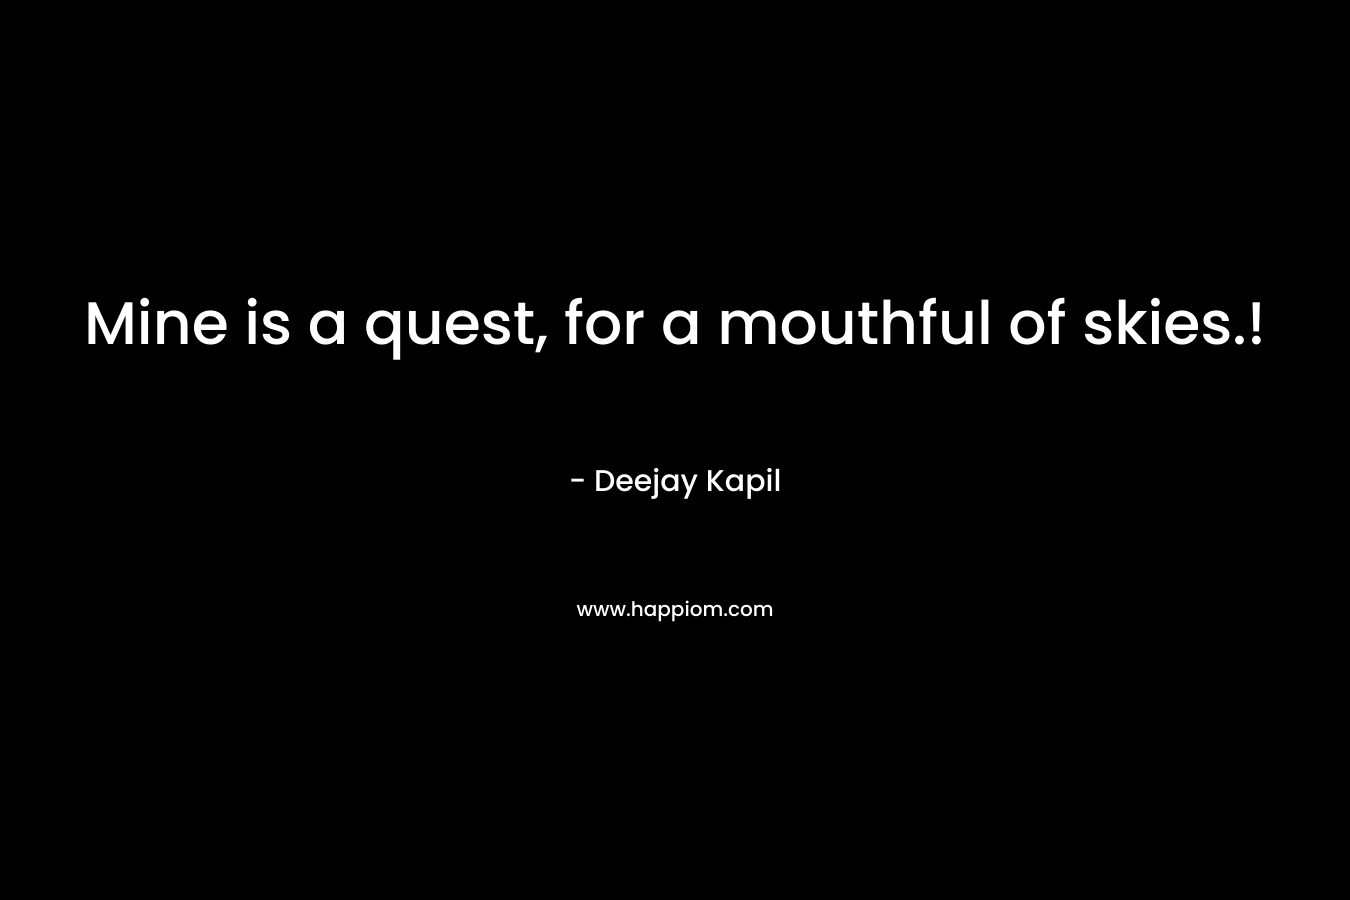 Mine is a quest, for a mouthful of skies.! – Deejay Kapil